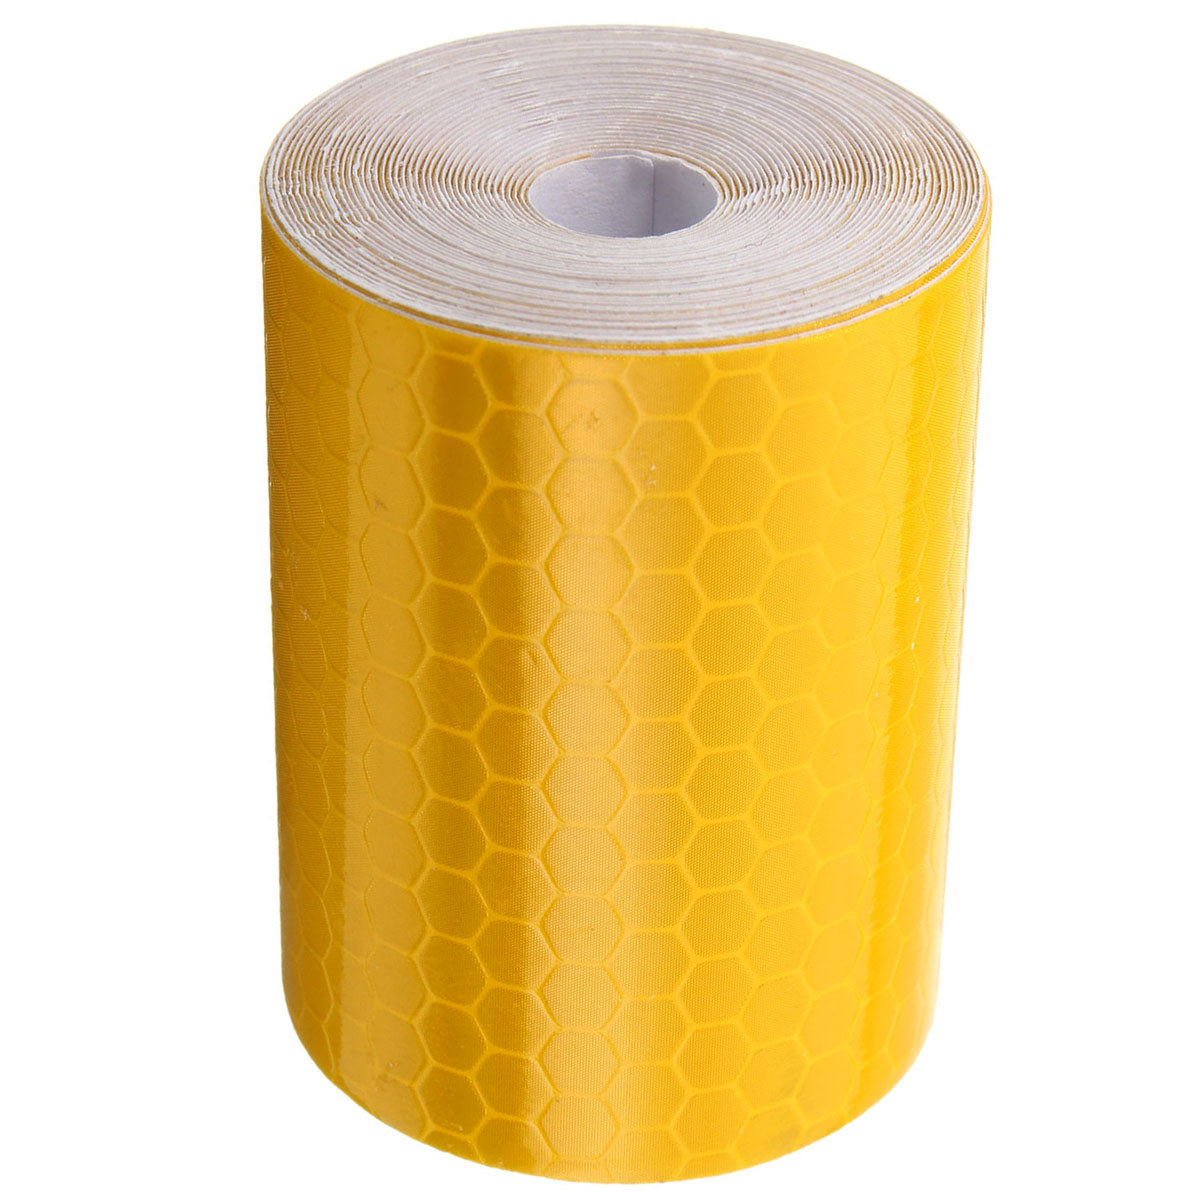 Goldenrod 5cm X 300cm Reflective Safety Warning Conspicuity Tape Film Car Sticker